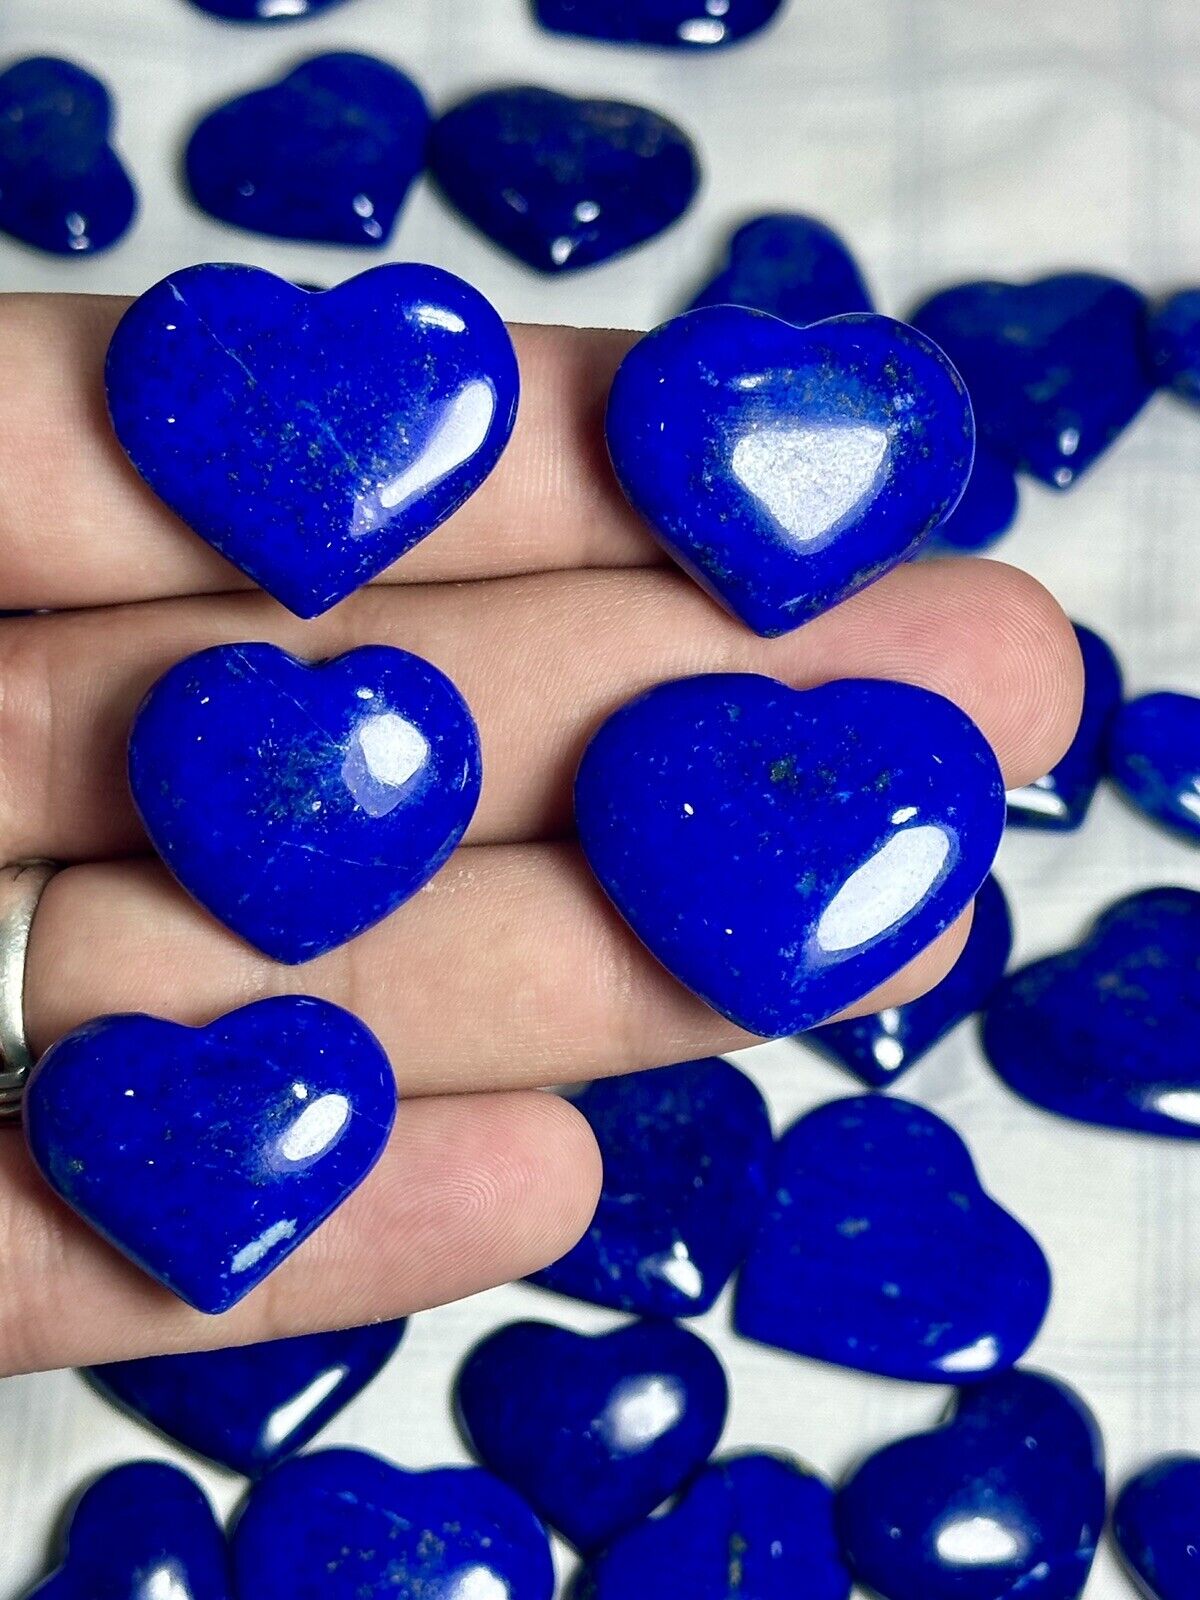 WOW 800g Top Quality Lapis Lazuli  Smaller Size Hearts Available For Sale